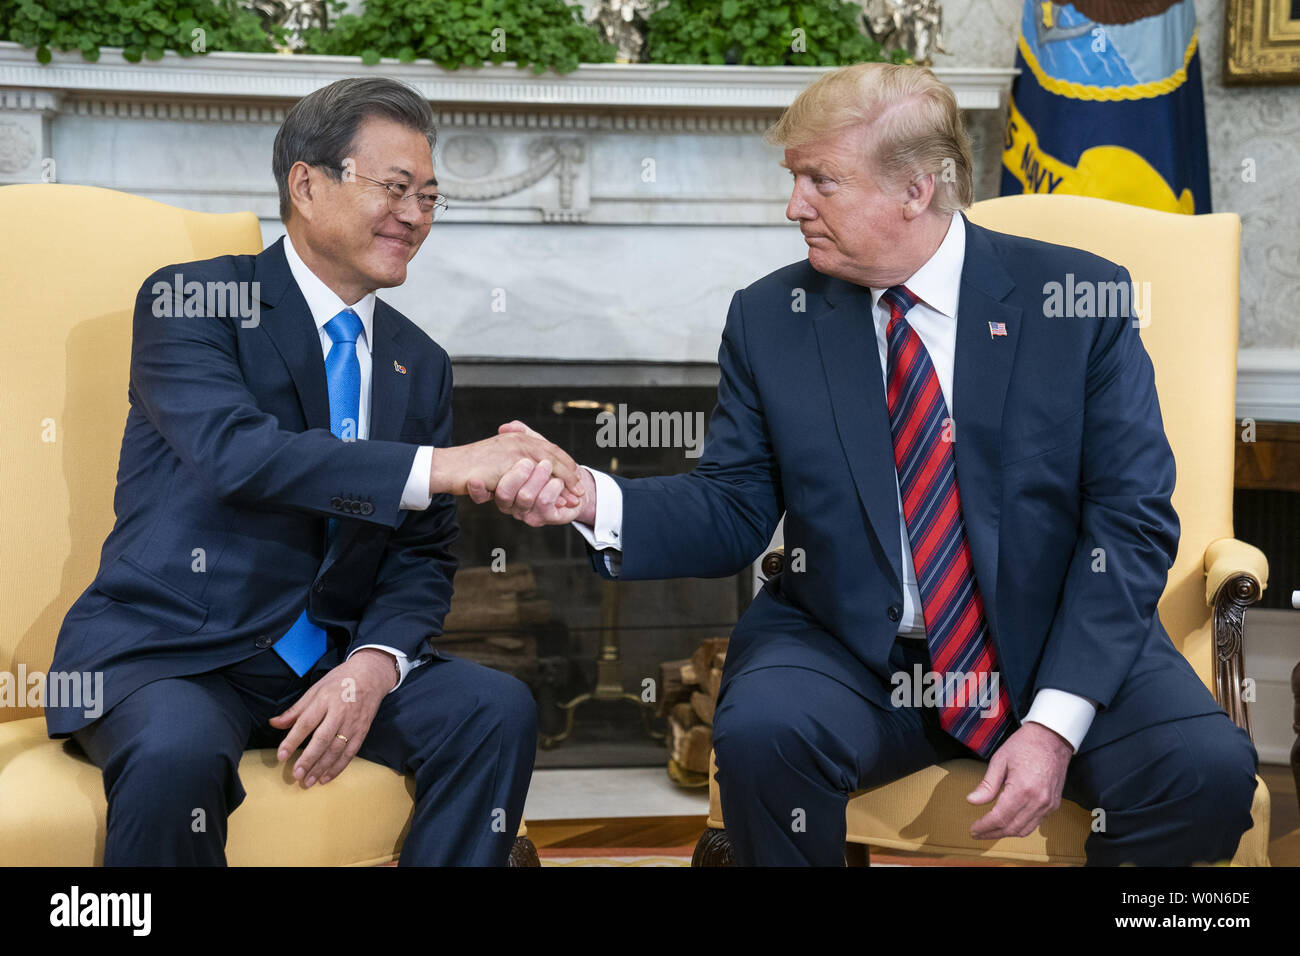 US President Donald J. Trump (R) welcomes South Korean President Moon Jae-in (L) to the Oval Office of the White House White House in Washington on April 11, 2019. President Moon is expected to ask President Trump to reduce sanctions on North Korea in an attempt to jump start nuclear negotiations between North Korea and the US.  Photo by Jim Lo Scalzo/UPI Stock Photo